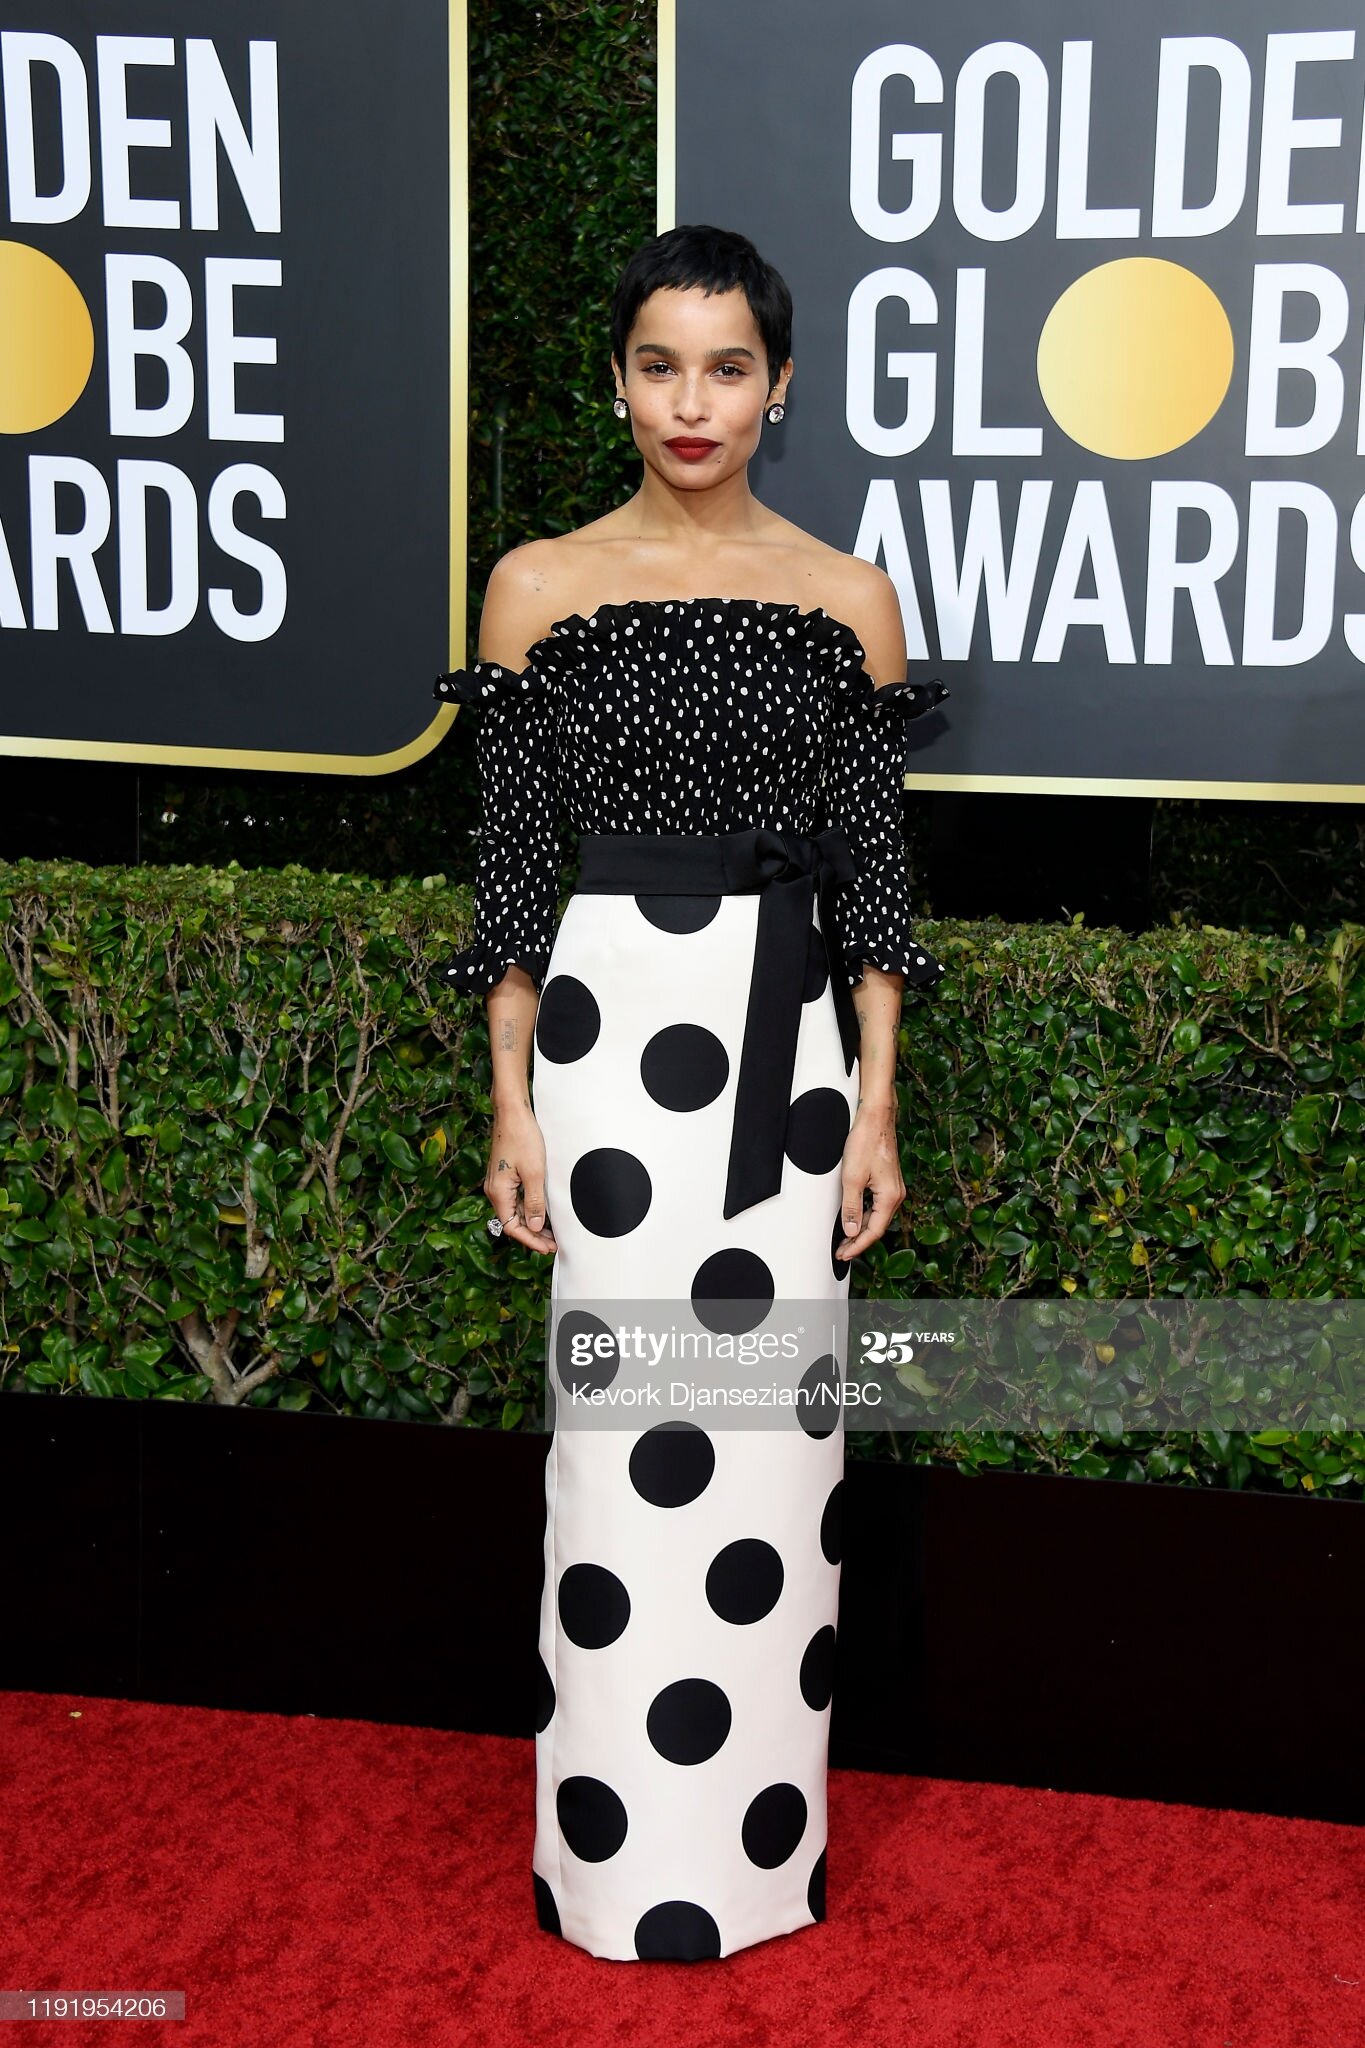 Zoe Kravitz at the 2020 Golden Globes, styled by Andrew Mukamal